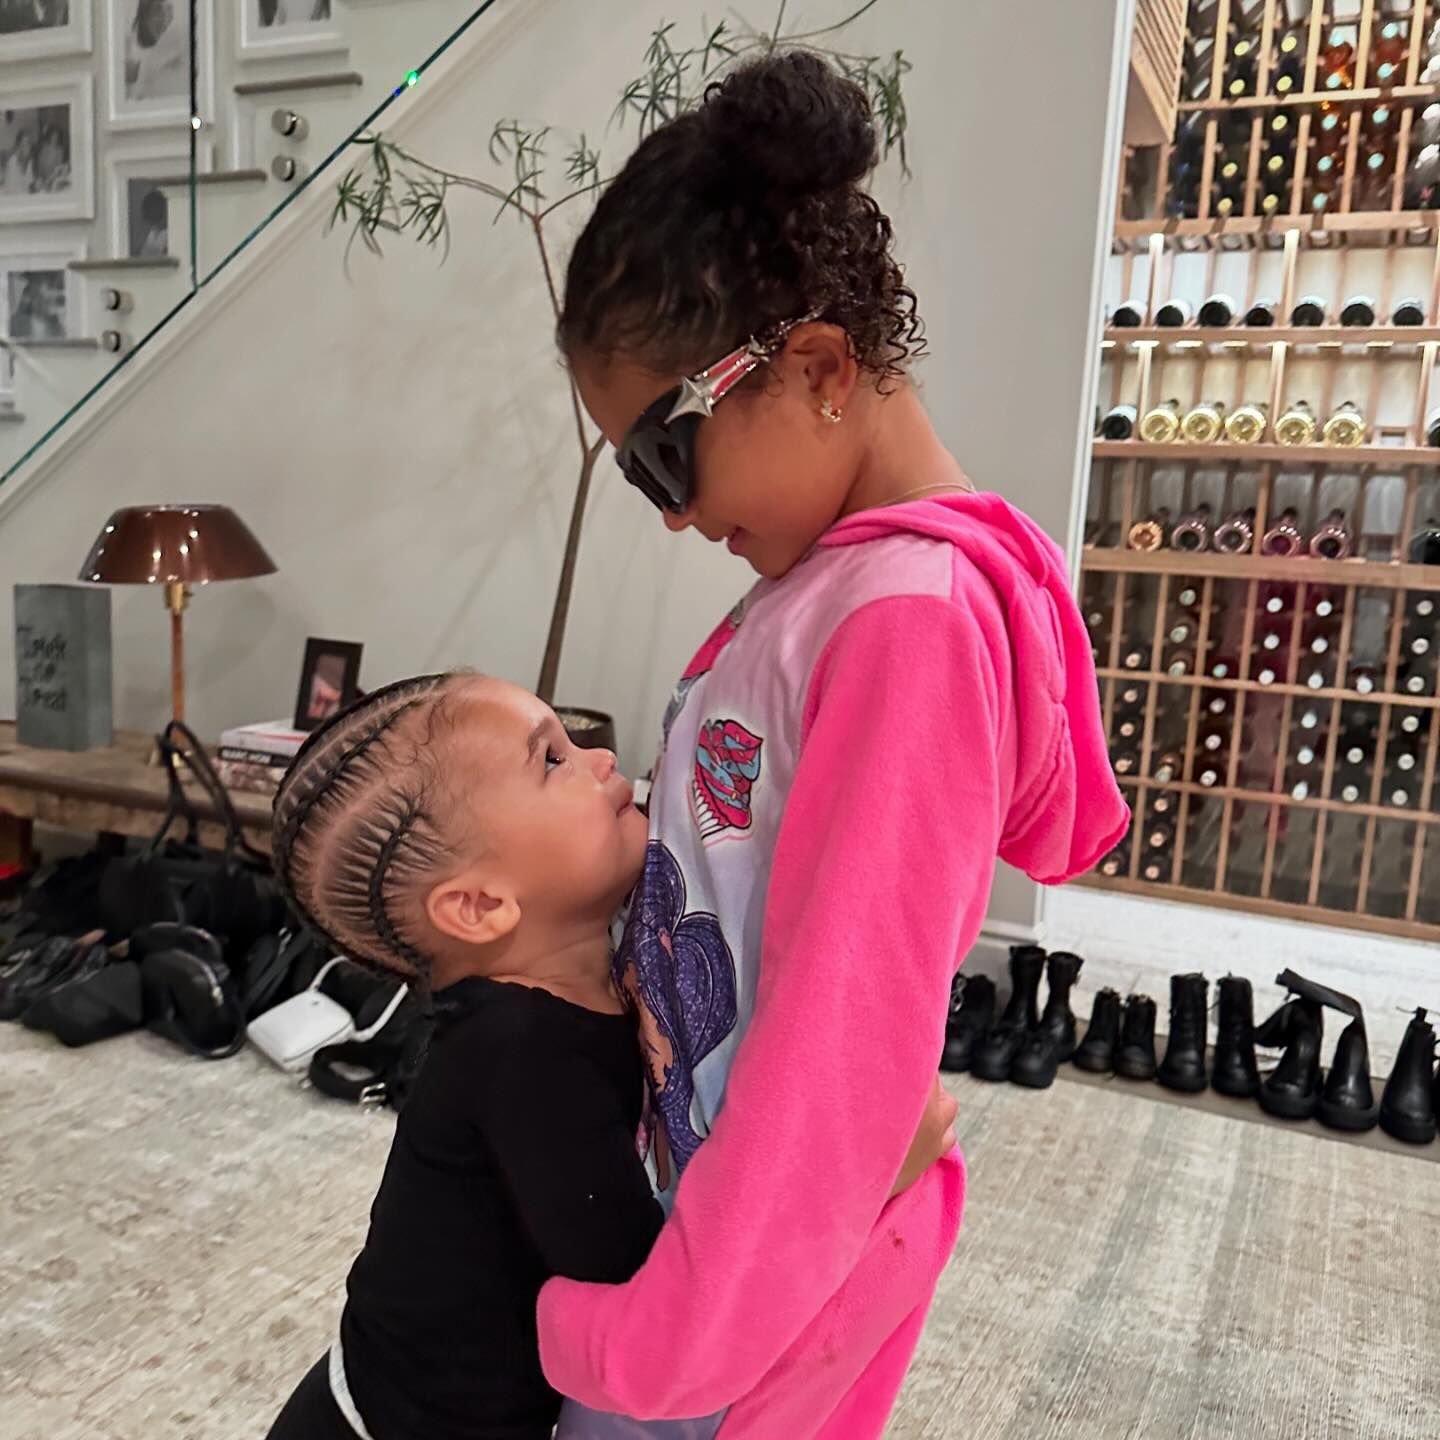 The siblings showed their adorable bond in the photos